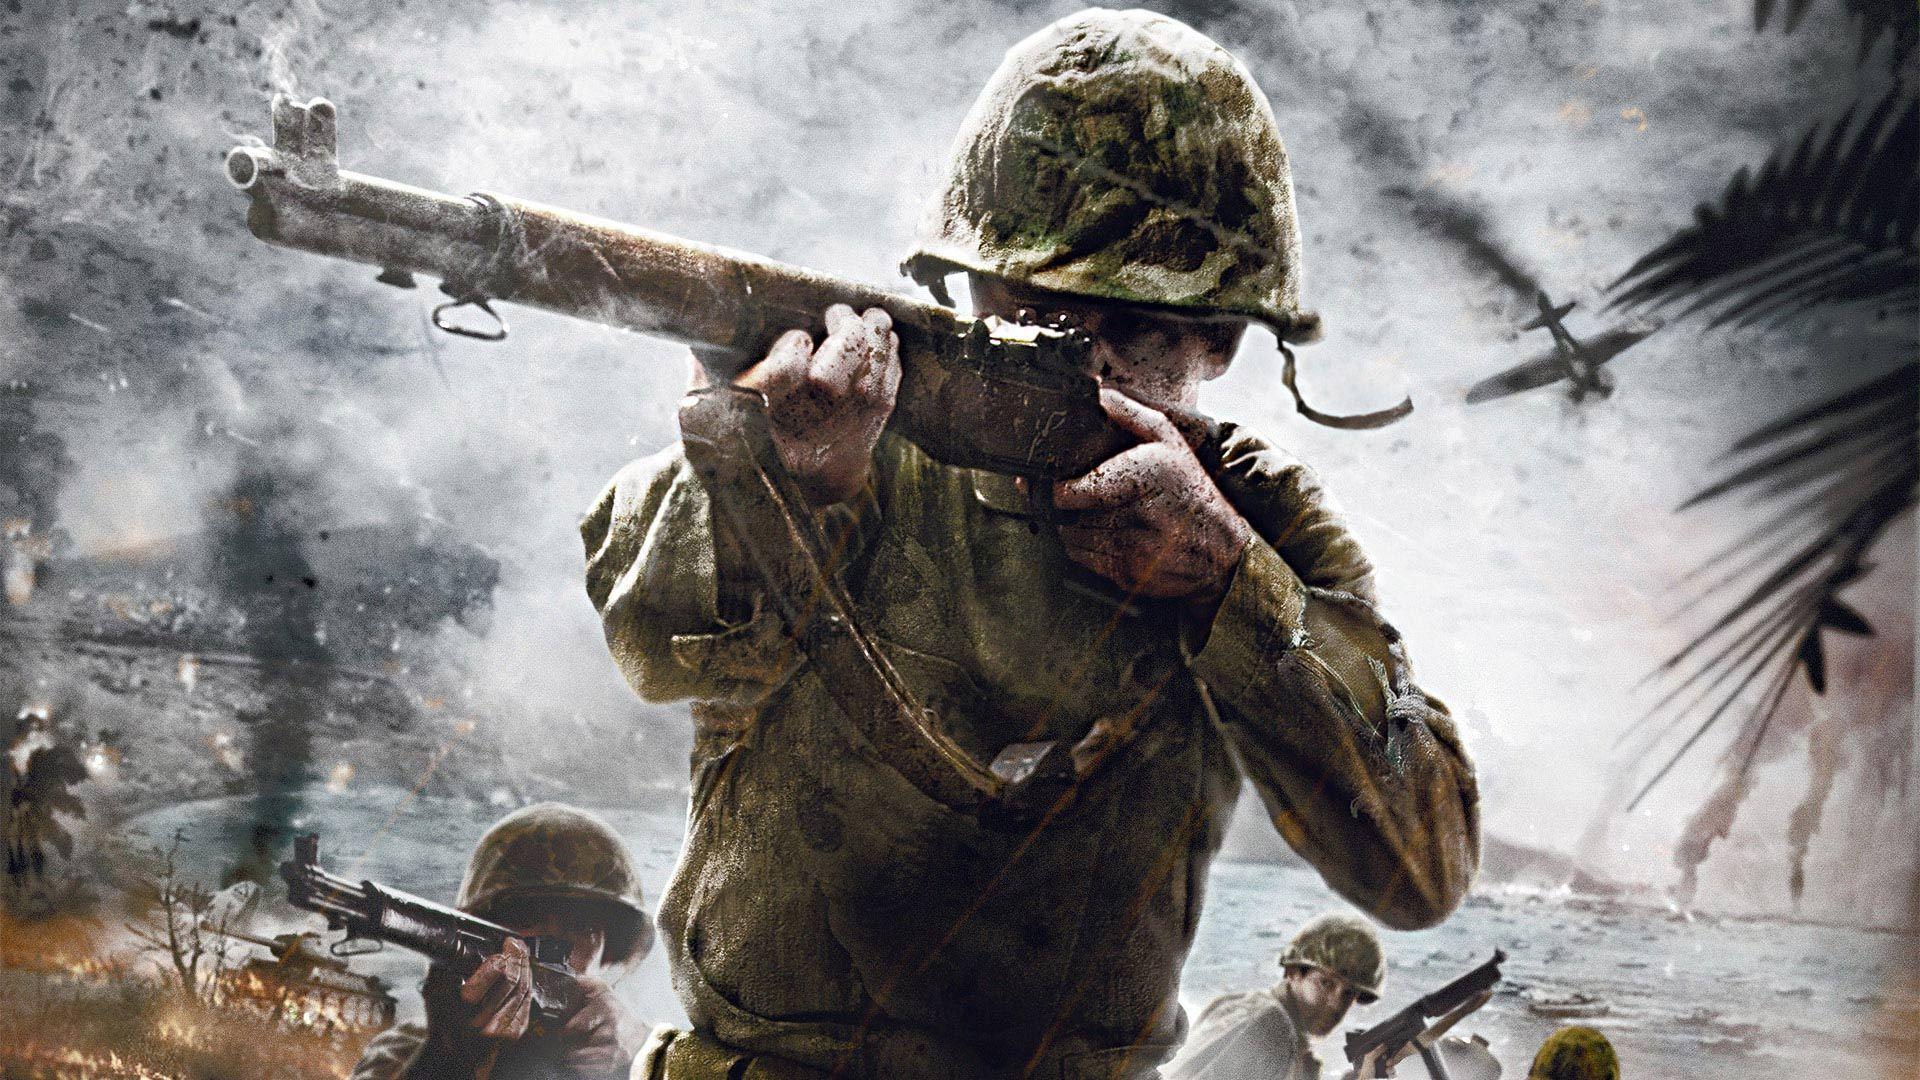 download call of duty ww2 pc